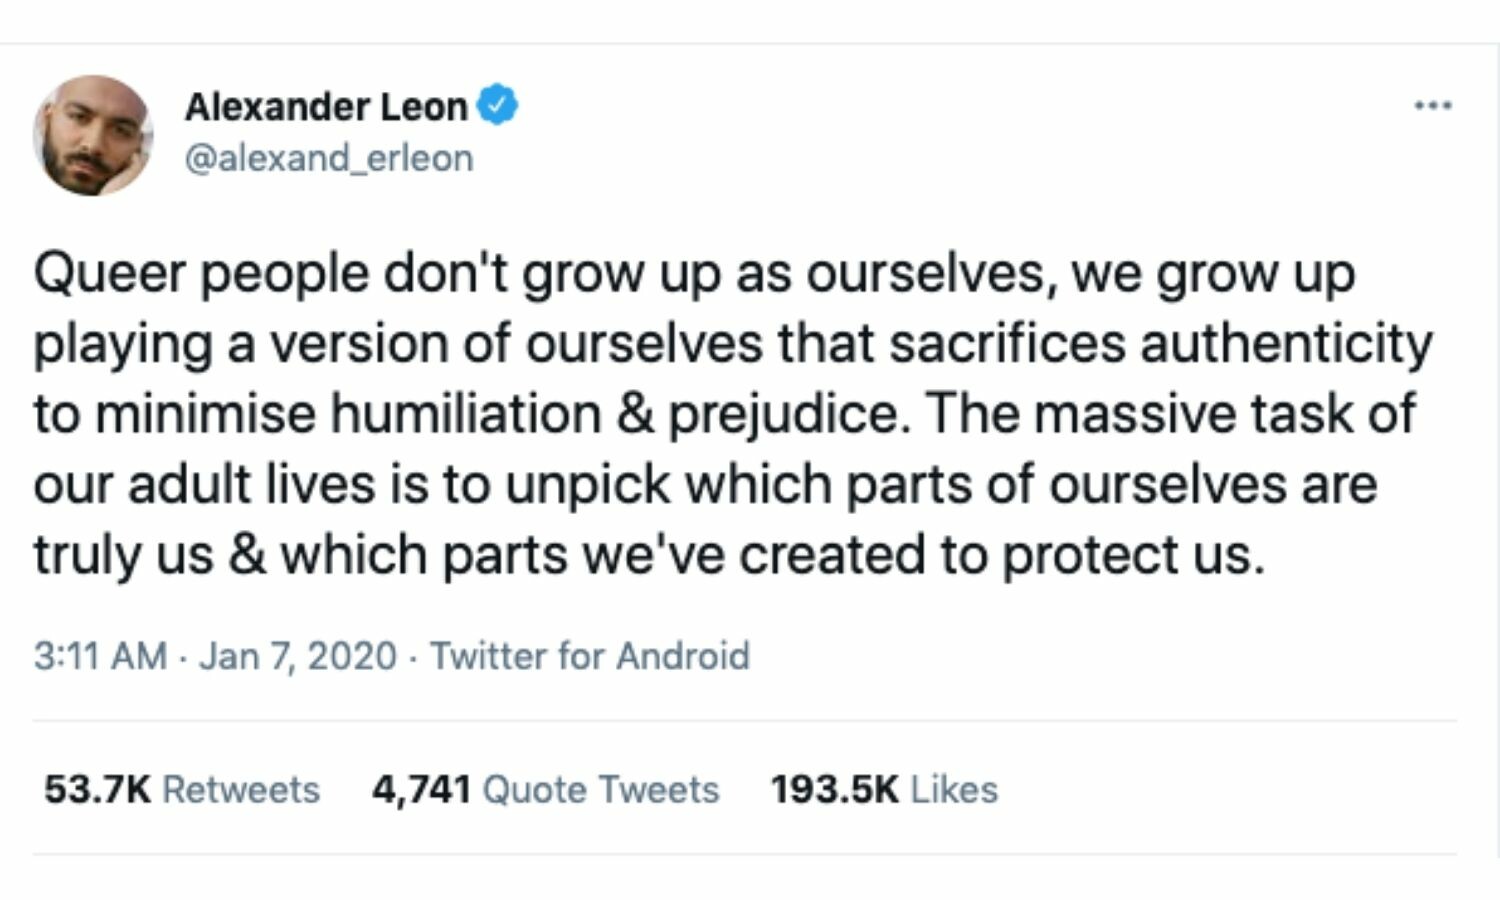 A tweet that says,"Queer people don't grow up as ourselves, we grow up playing a version of ourselves that sacrifices authenticity to minimise humiliation & prejudice. The massive task of our adult lives is to unpick which parts of ourselves are truly us & which parts we've created to protect us."